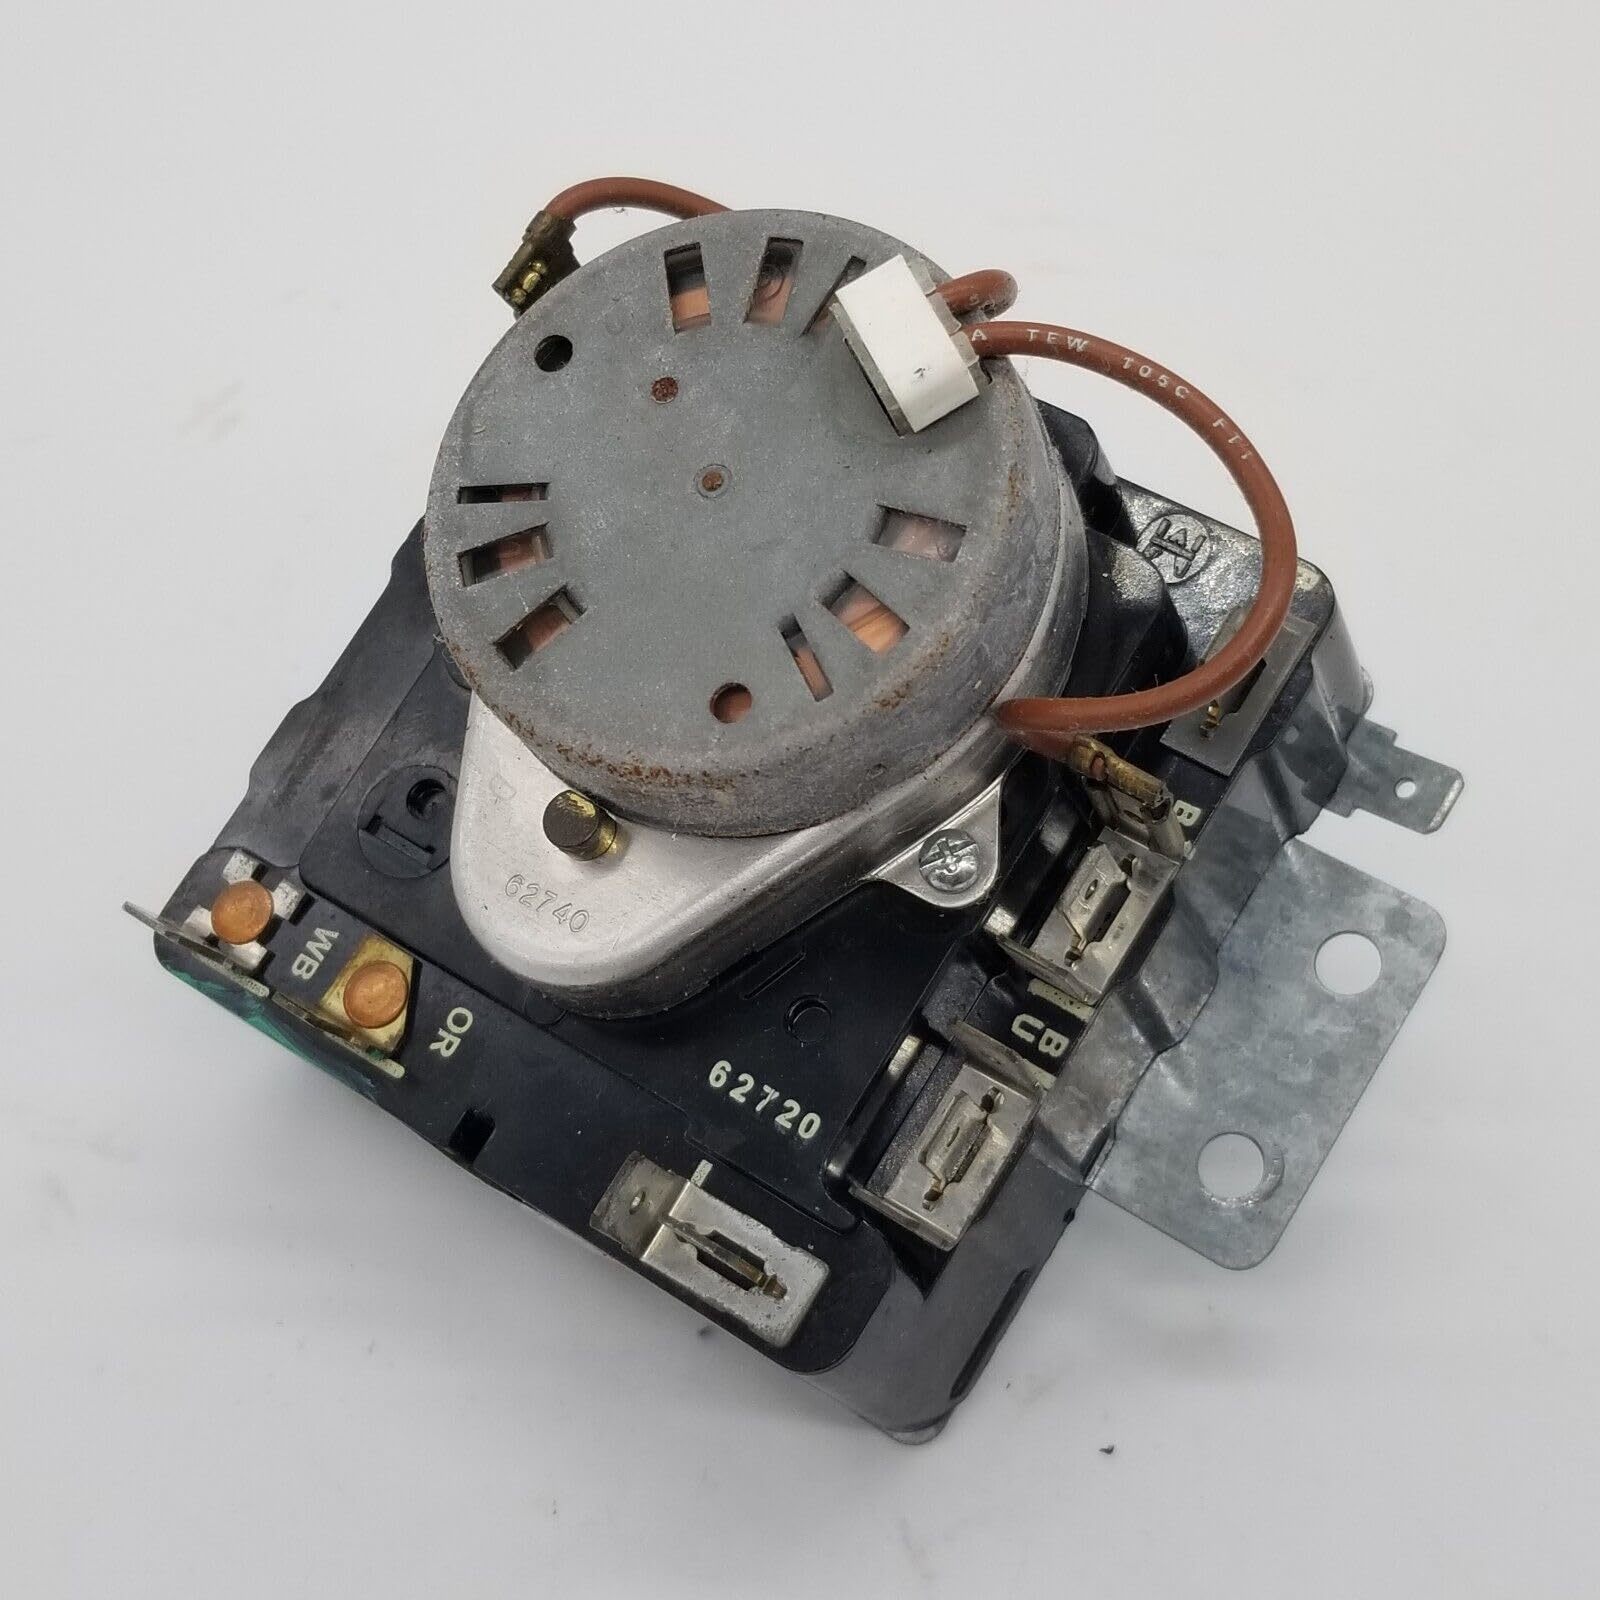 Primary image for OEM Replacement for Whirlpool Dryer Timer 8299781